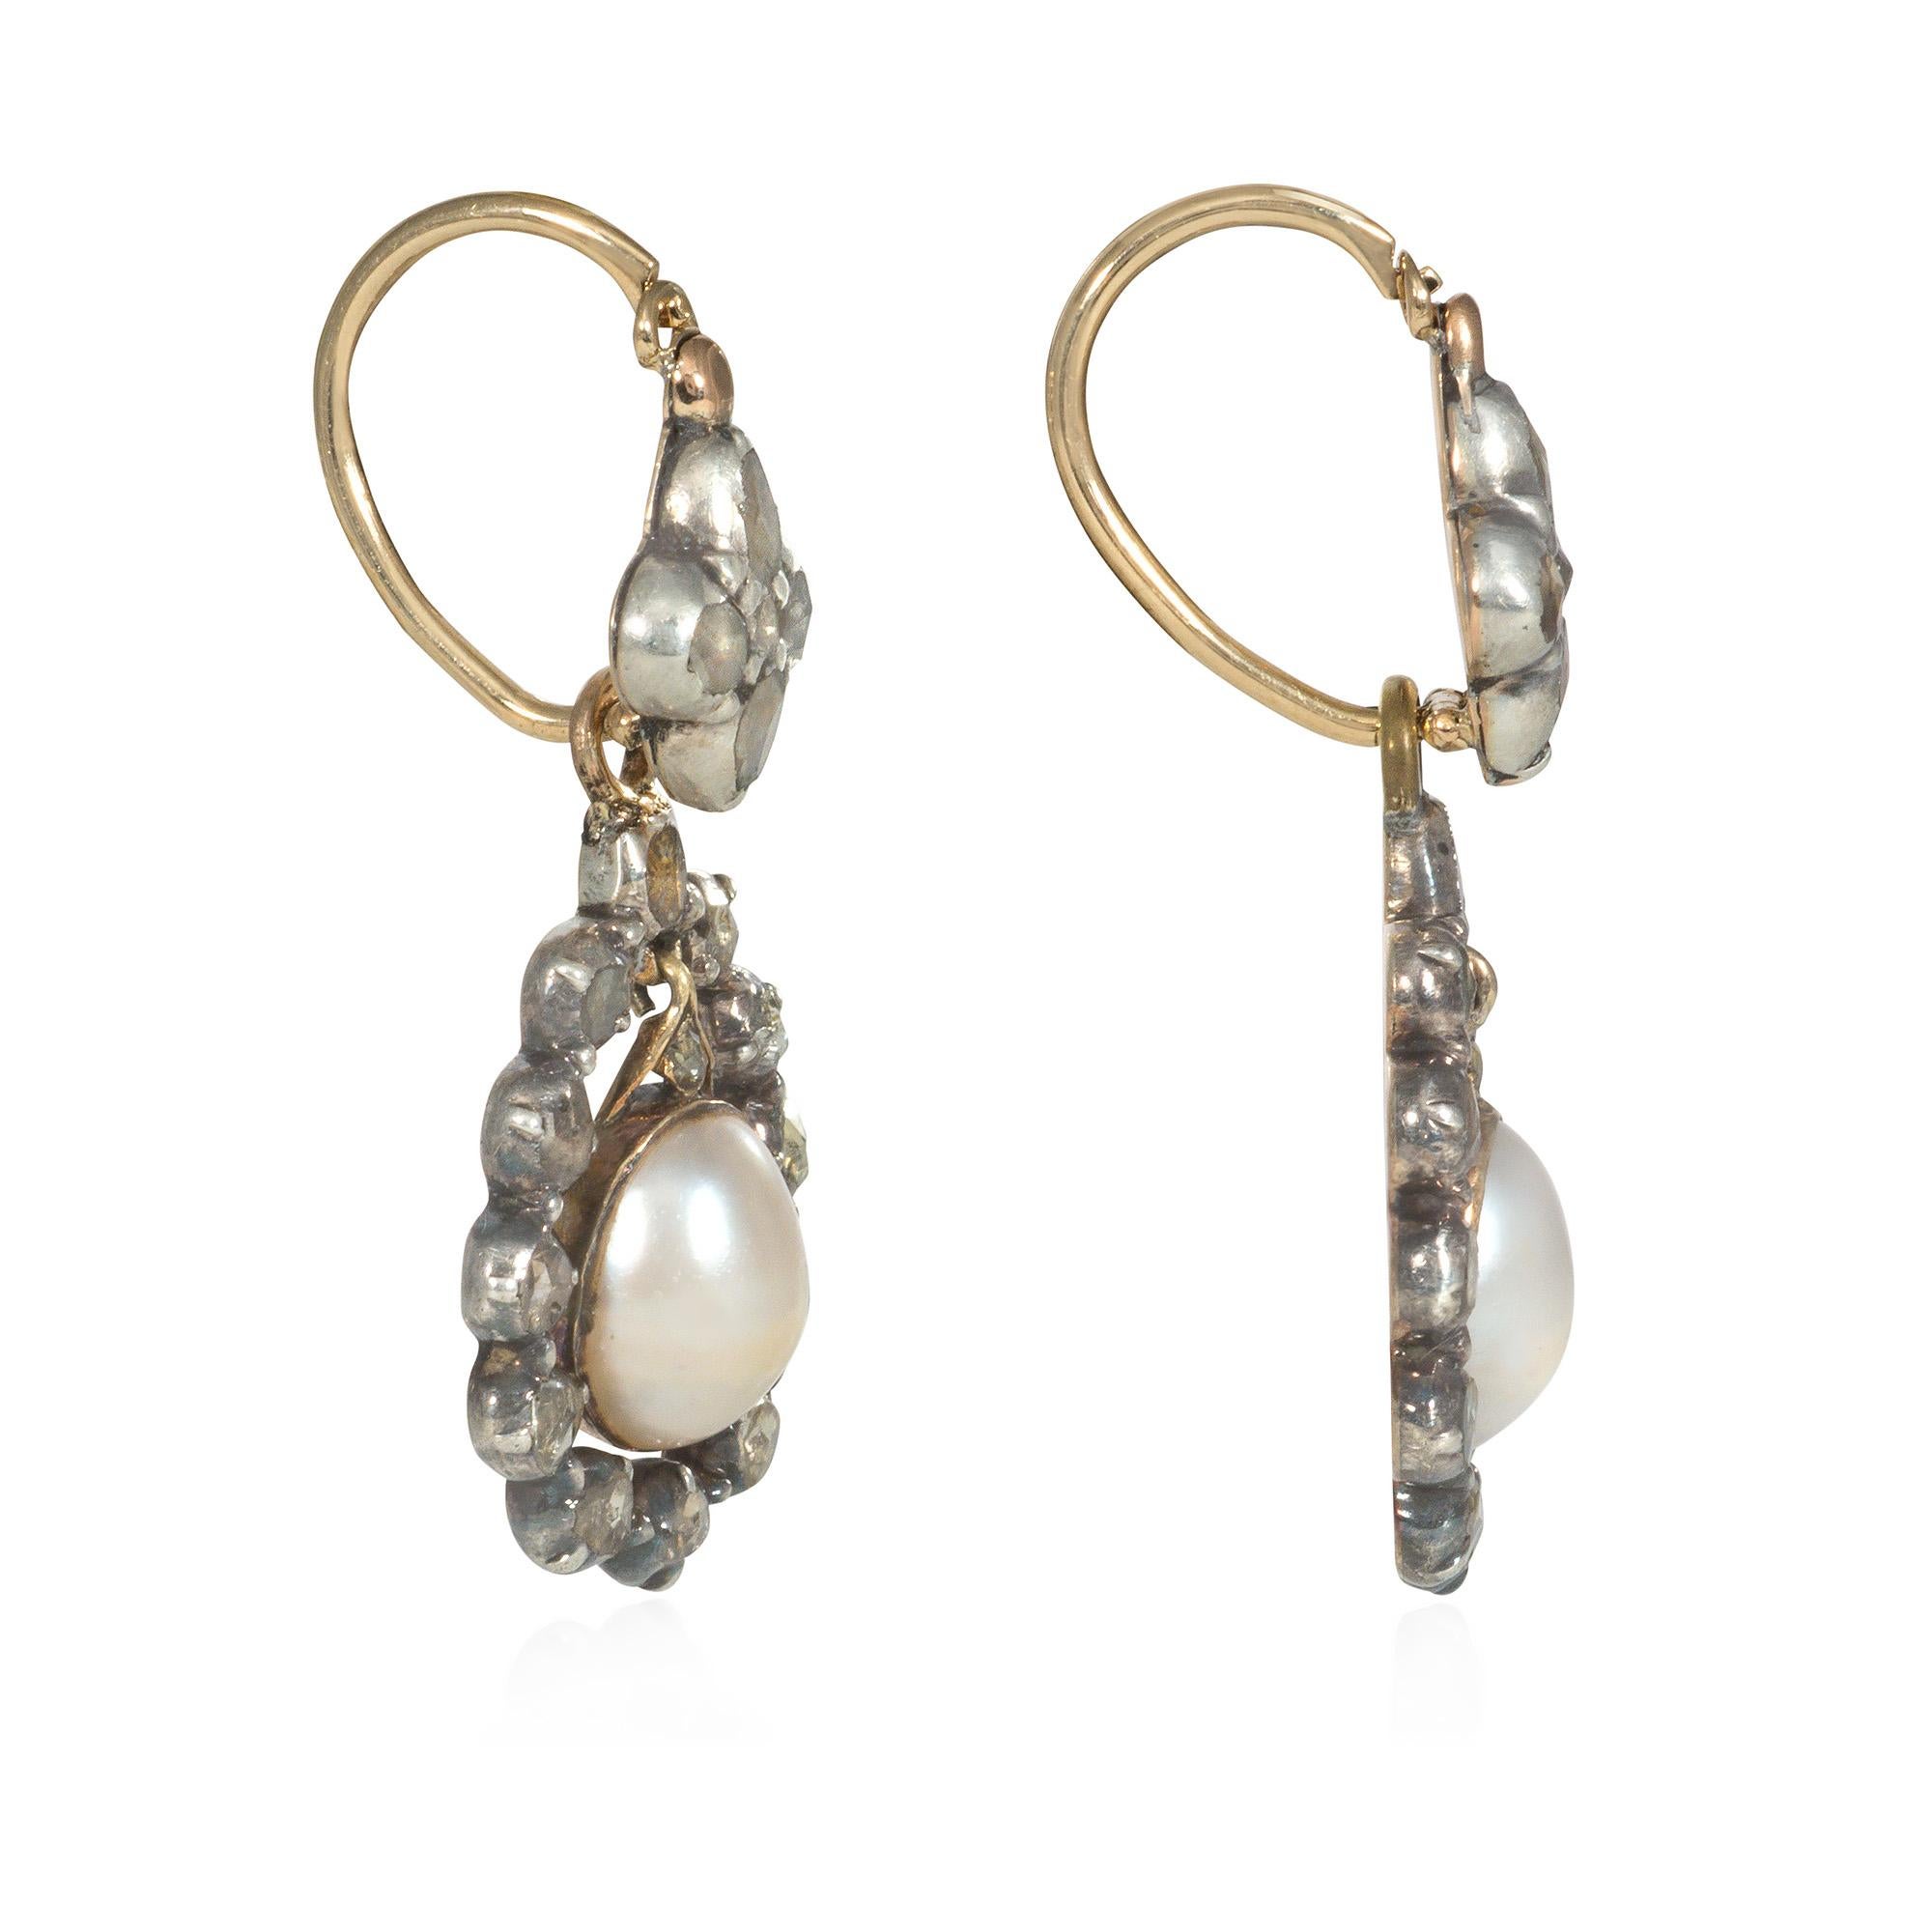 A pair of antique Georgian period diamond and pearl earrings, the pendants comprised of articulated half pearls in pear-shaped rose diamond surrounds suspended from quatrefoil rose diamond surmounts, in sterling silver and 18k gold.  Approximately 1